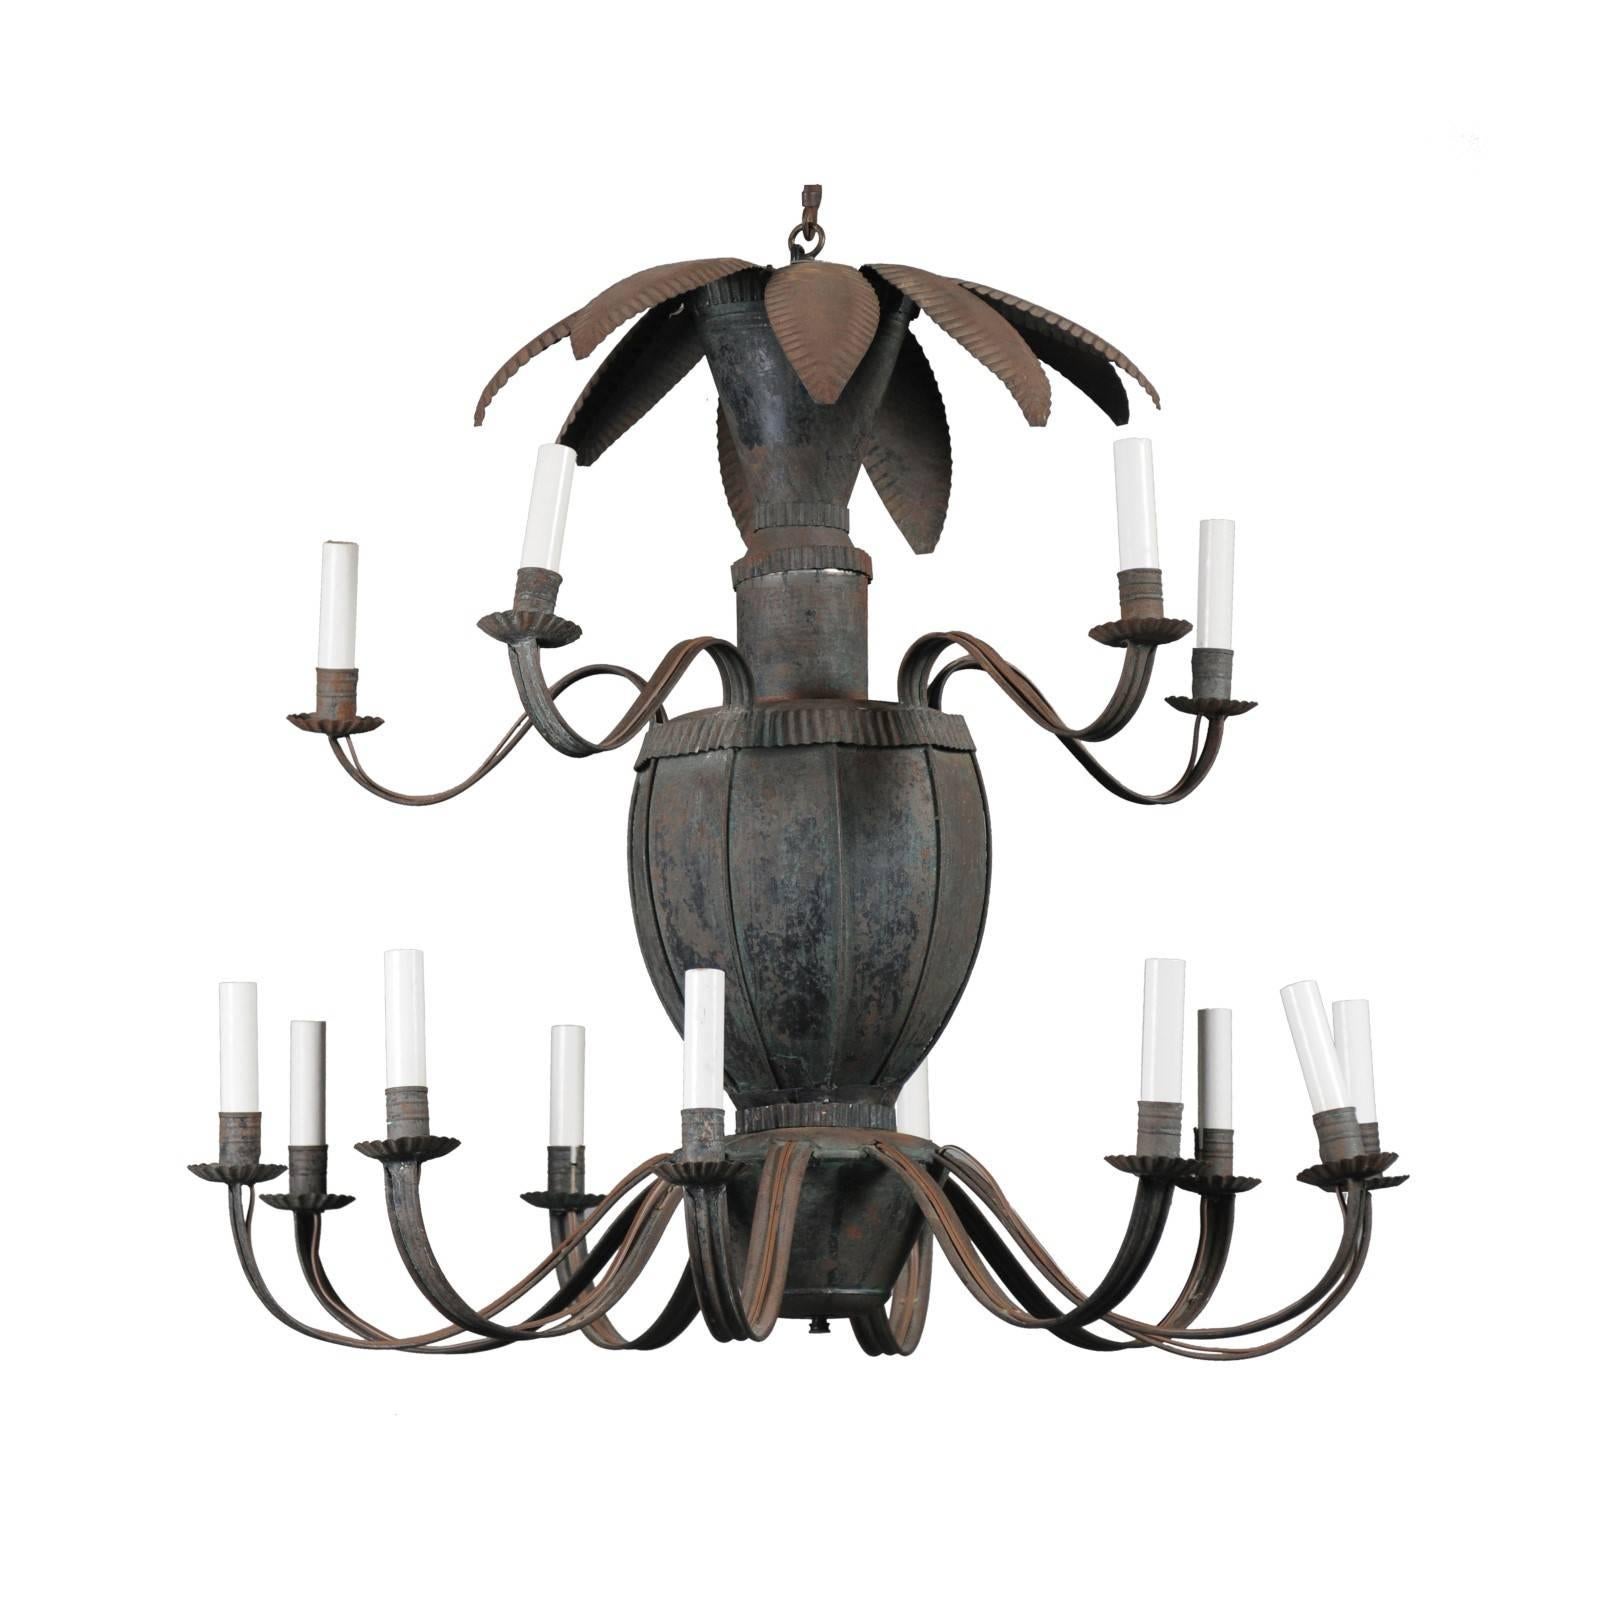 Unusual French 14-Light Painted Tole Chandelier with Scrolled Arms and Leaves